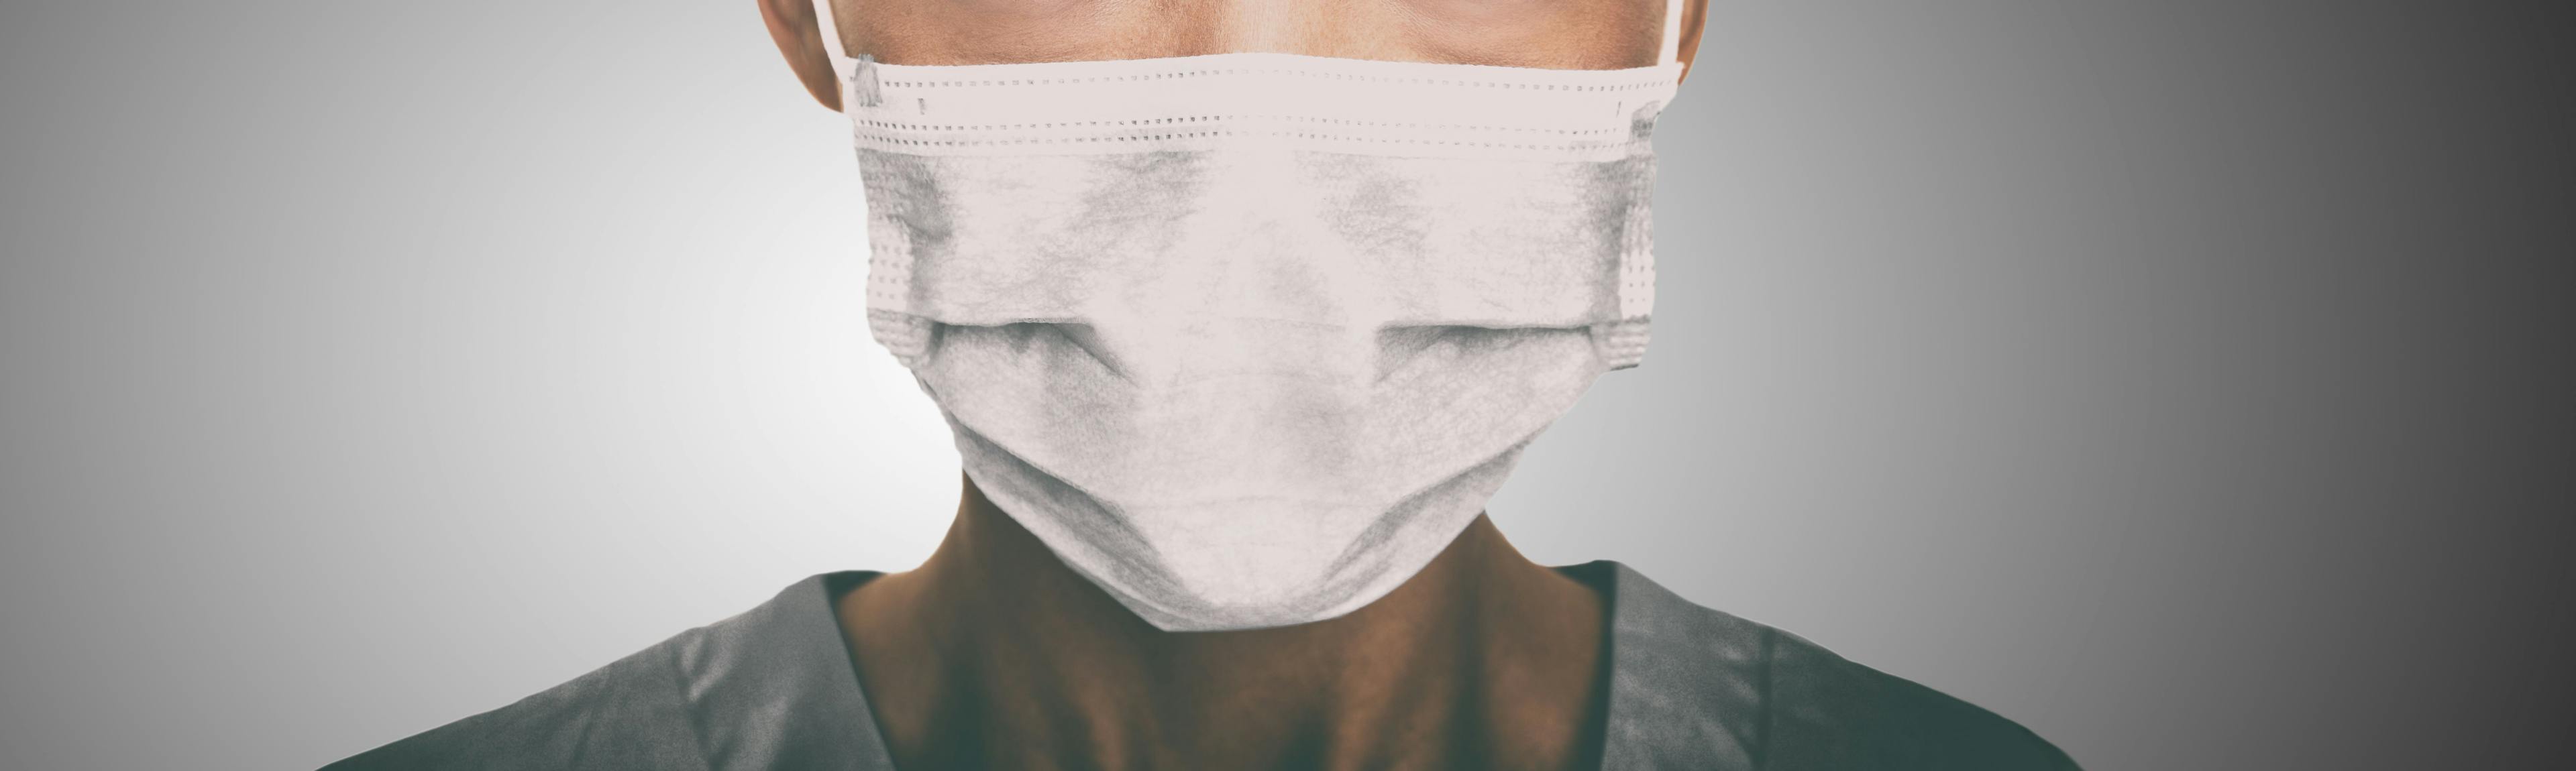 COVID-19 Case Report: No HCWs Infected, Most Didn't Wear N95 Masks